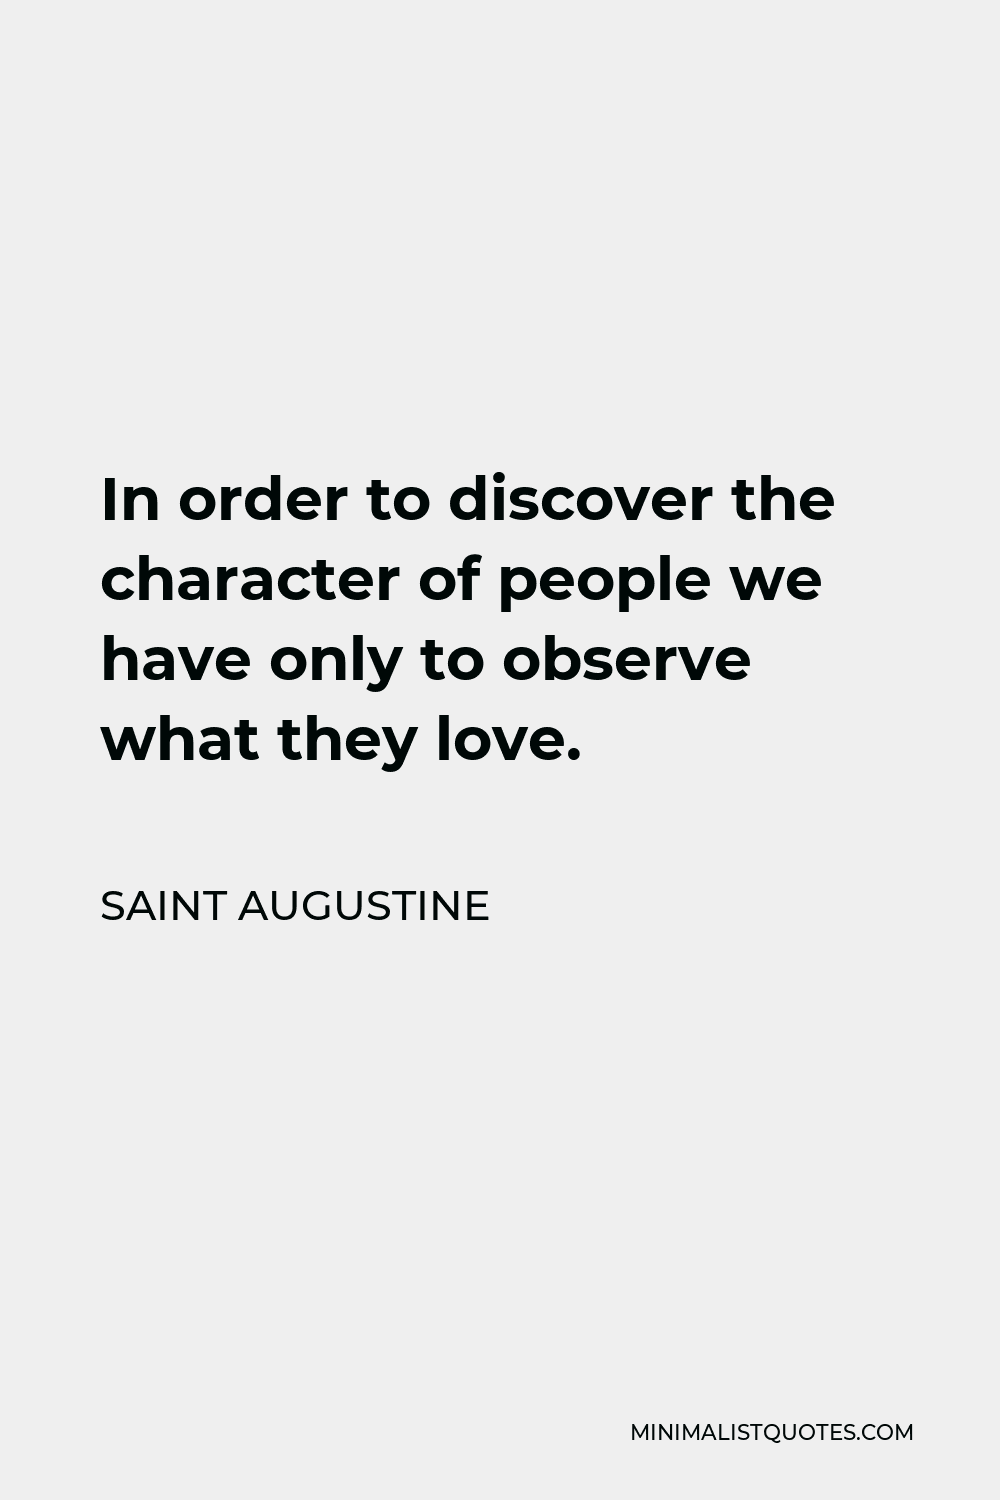 Saint Augustine Quote - In order to discover the character of people we have only to observe what they love.